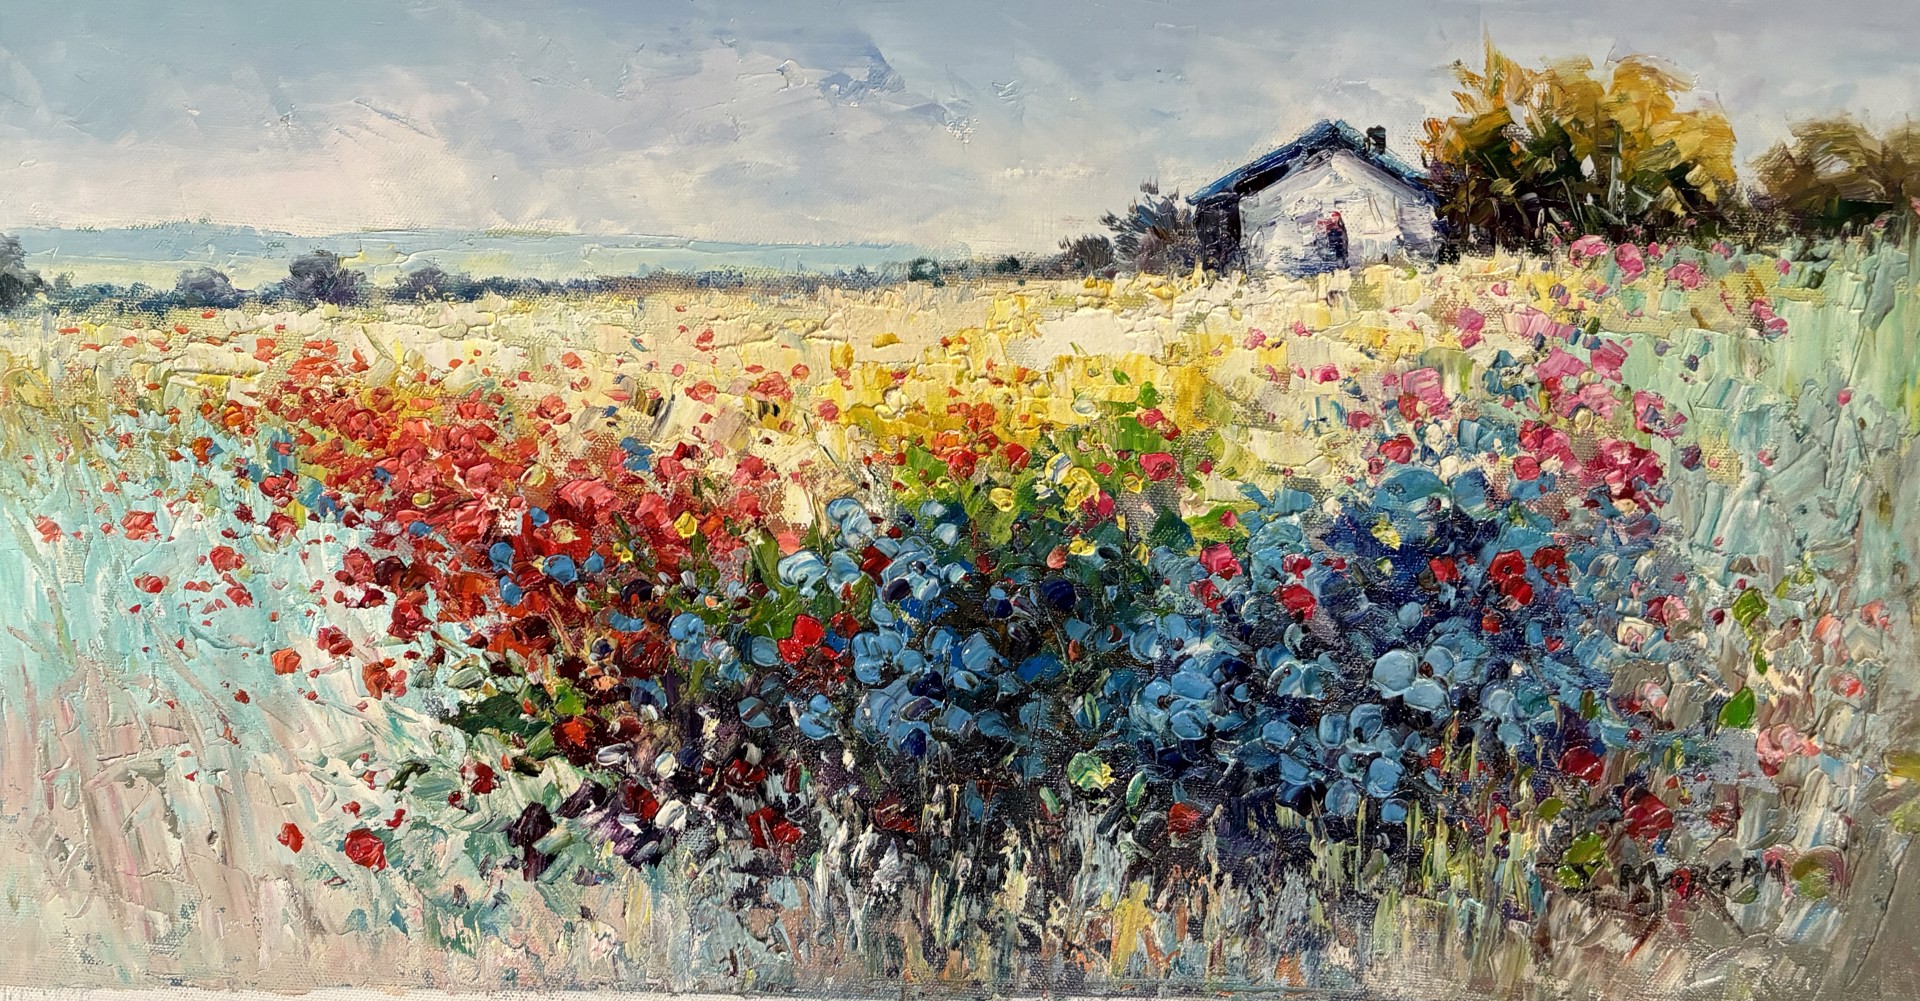 HORIZONTAL FLORAL WITH BARN by J MORGAN